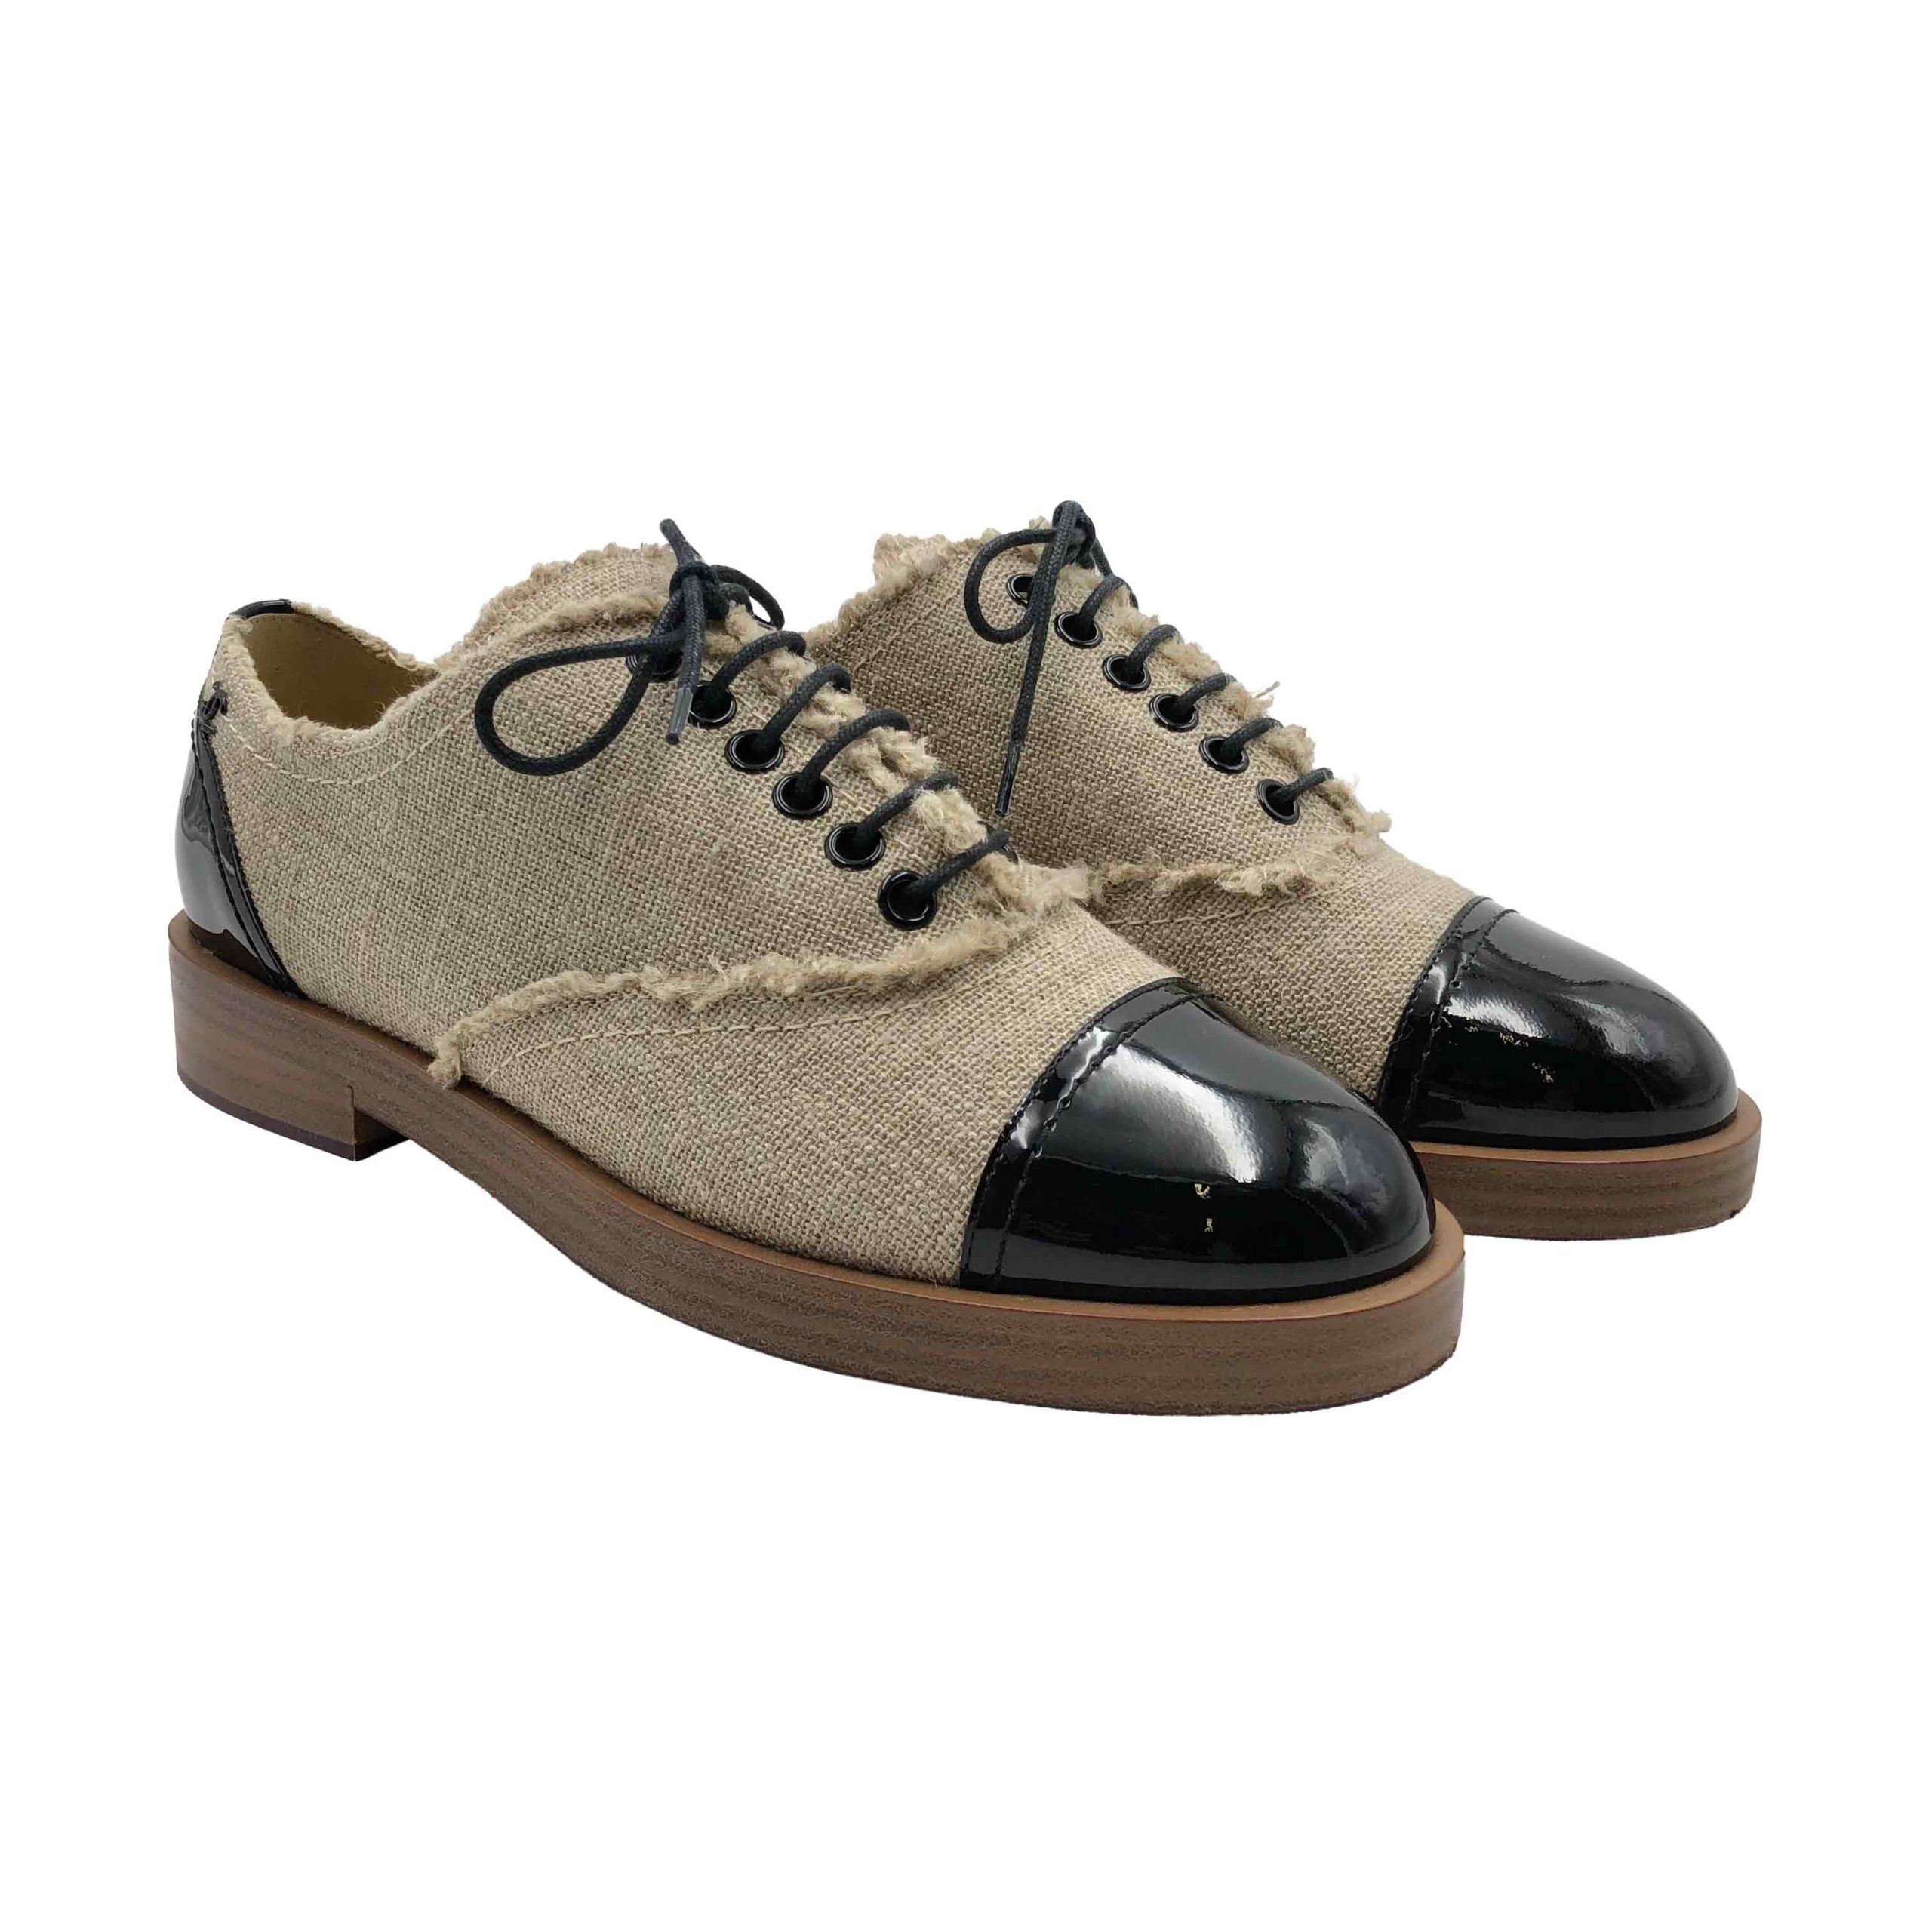 Chanel Oxford shoes in hessian with black patent toes - DOWNTOWN UPTOWN  Genève